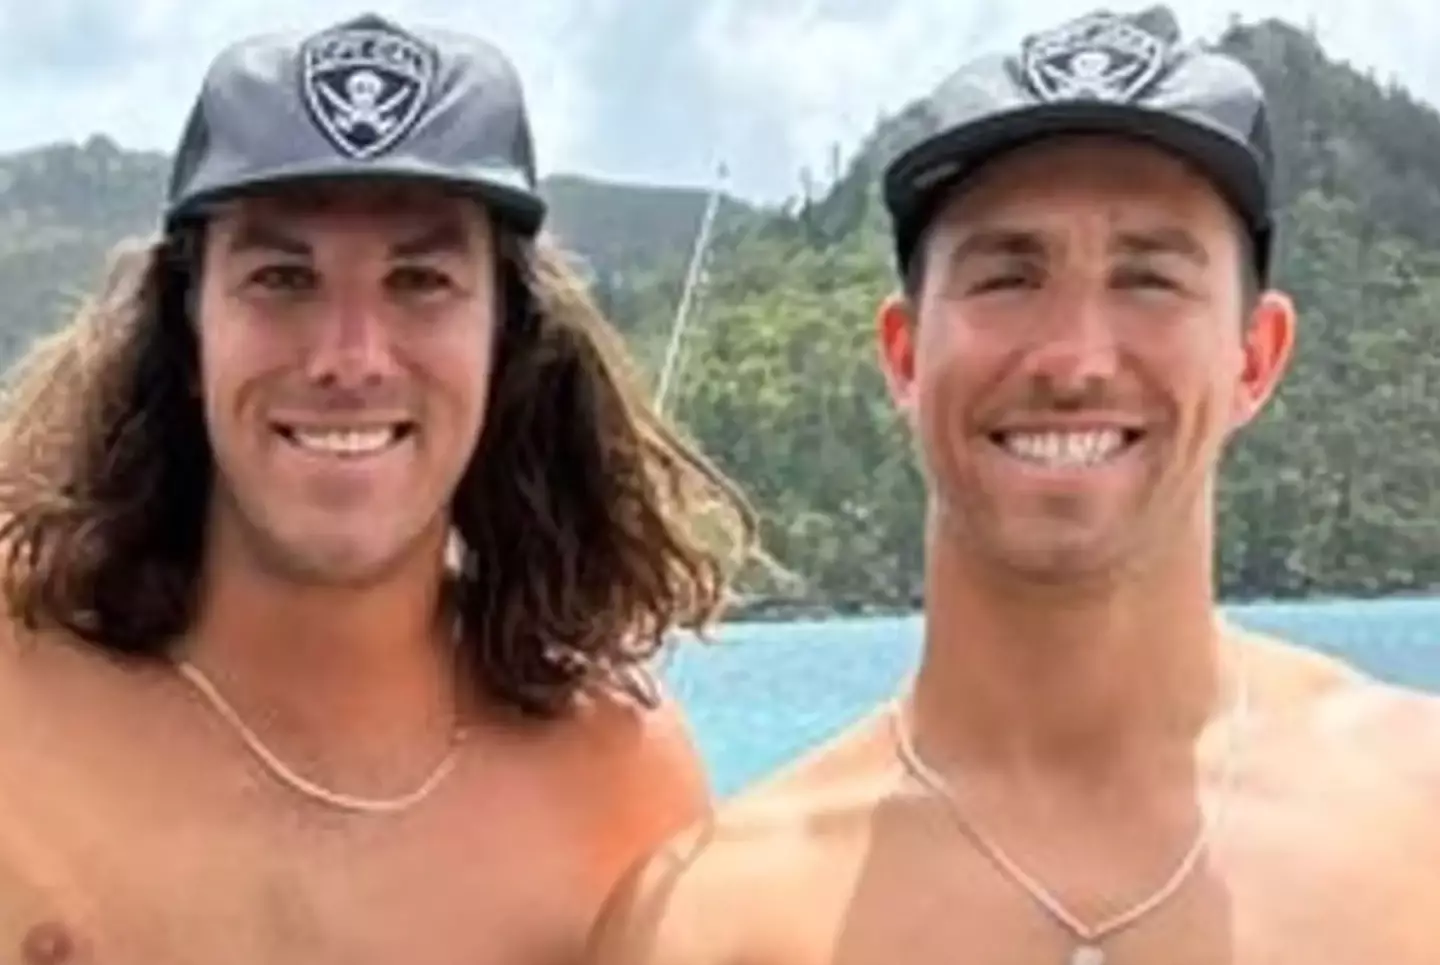 Brothers Callum and Jake Robinson were shot dead alongside friend Jack Carter Rhoad on a surfing trip in Mexico. (Instagram/@callum10robinson)